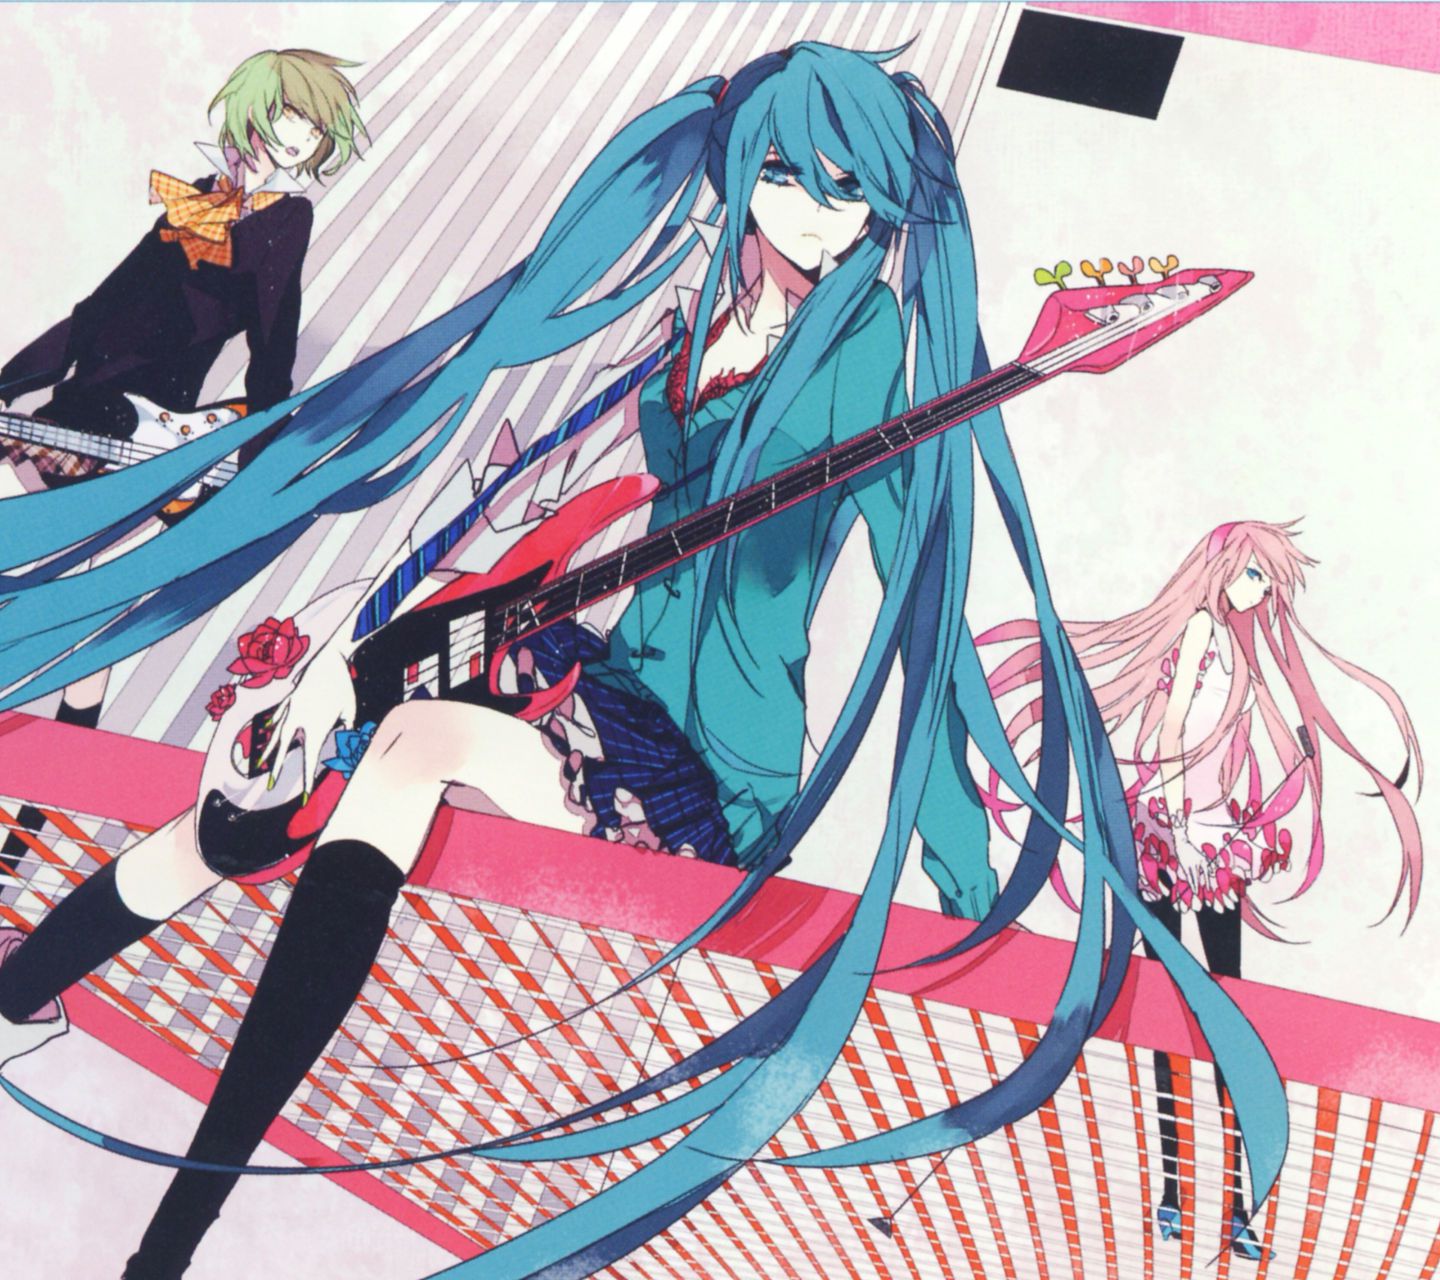 Vocaloid Android壁紙 5 アニメ壁紙ネット Pc Android Iphone壁紙 画像